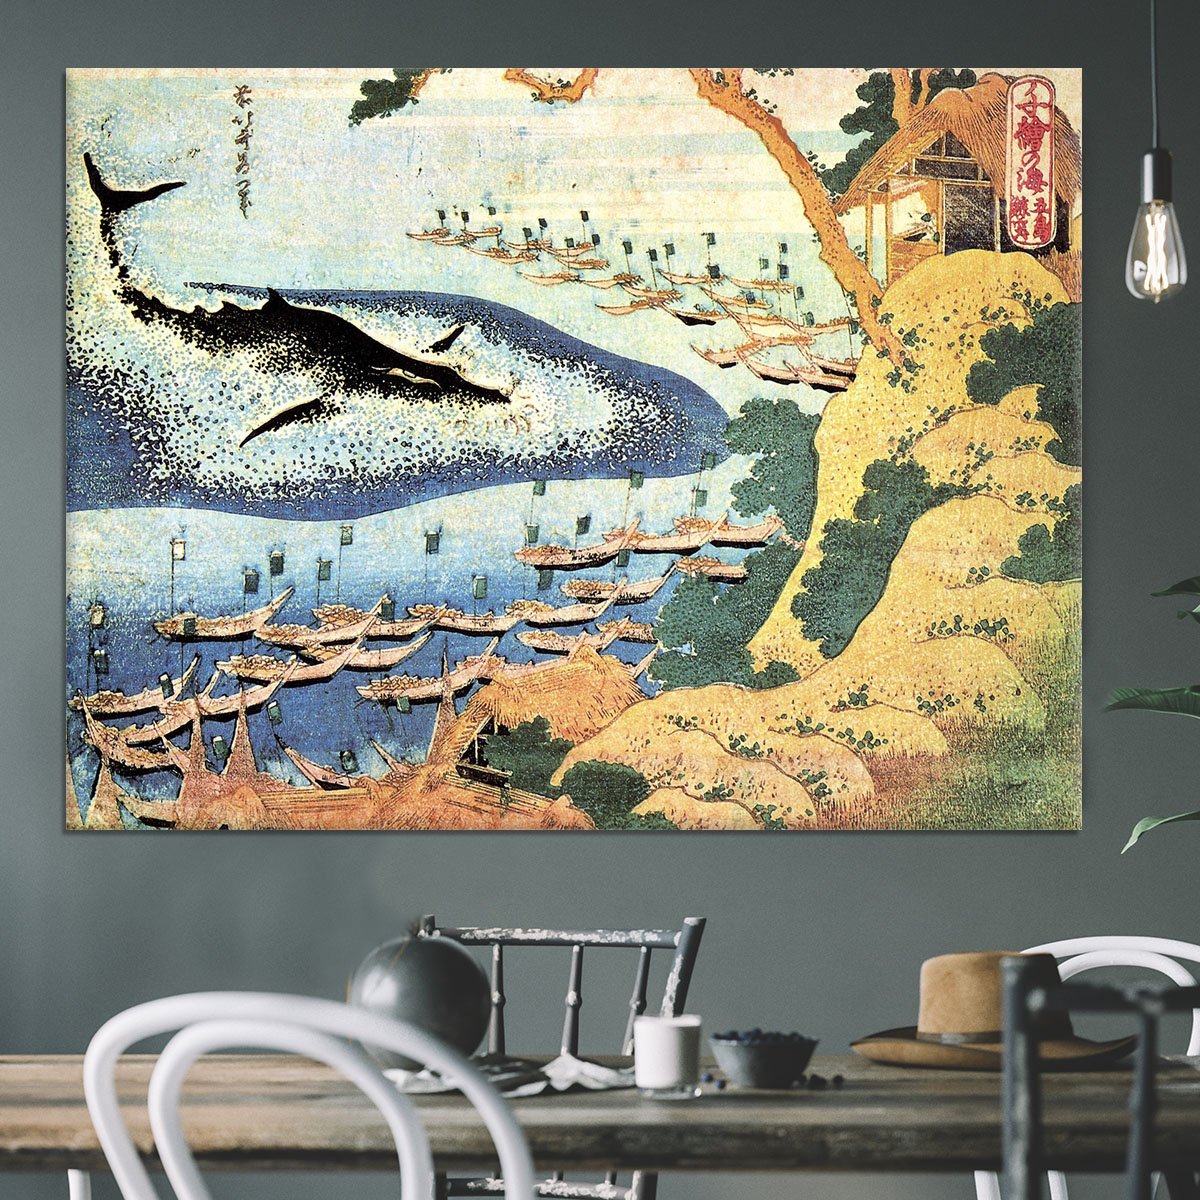 Ocean landscape and whale by Hokusai Canvas Print or Poster